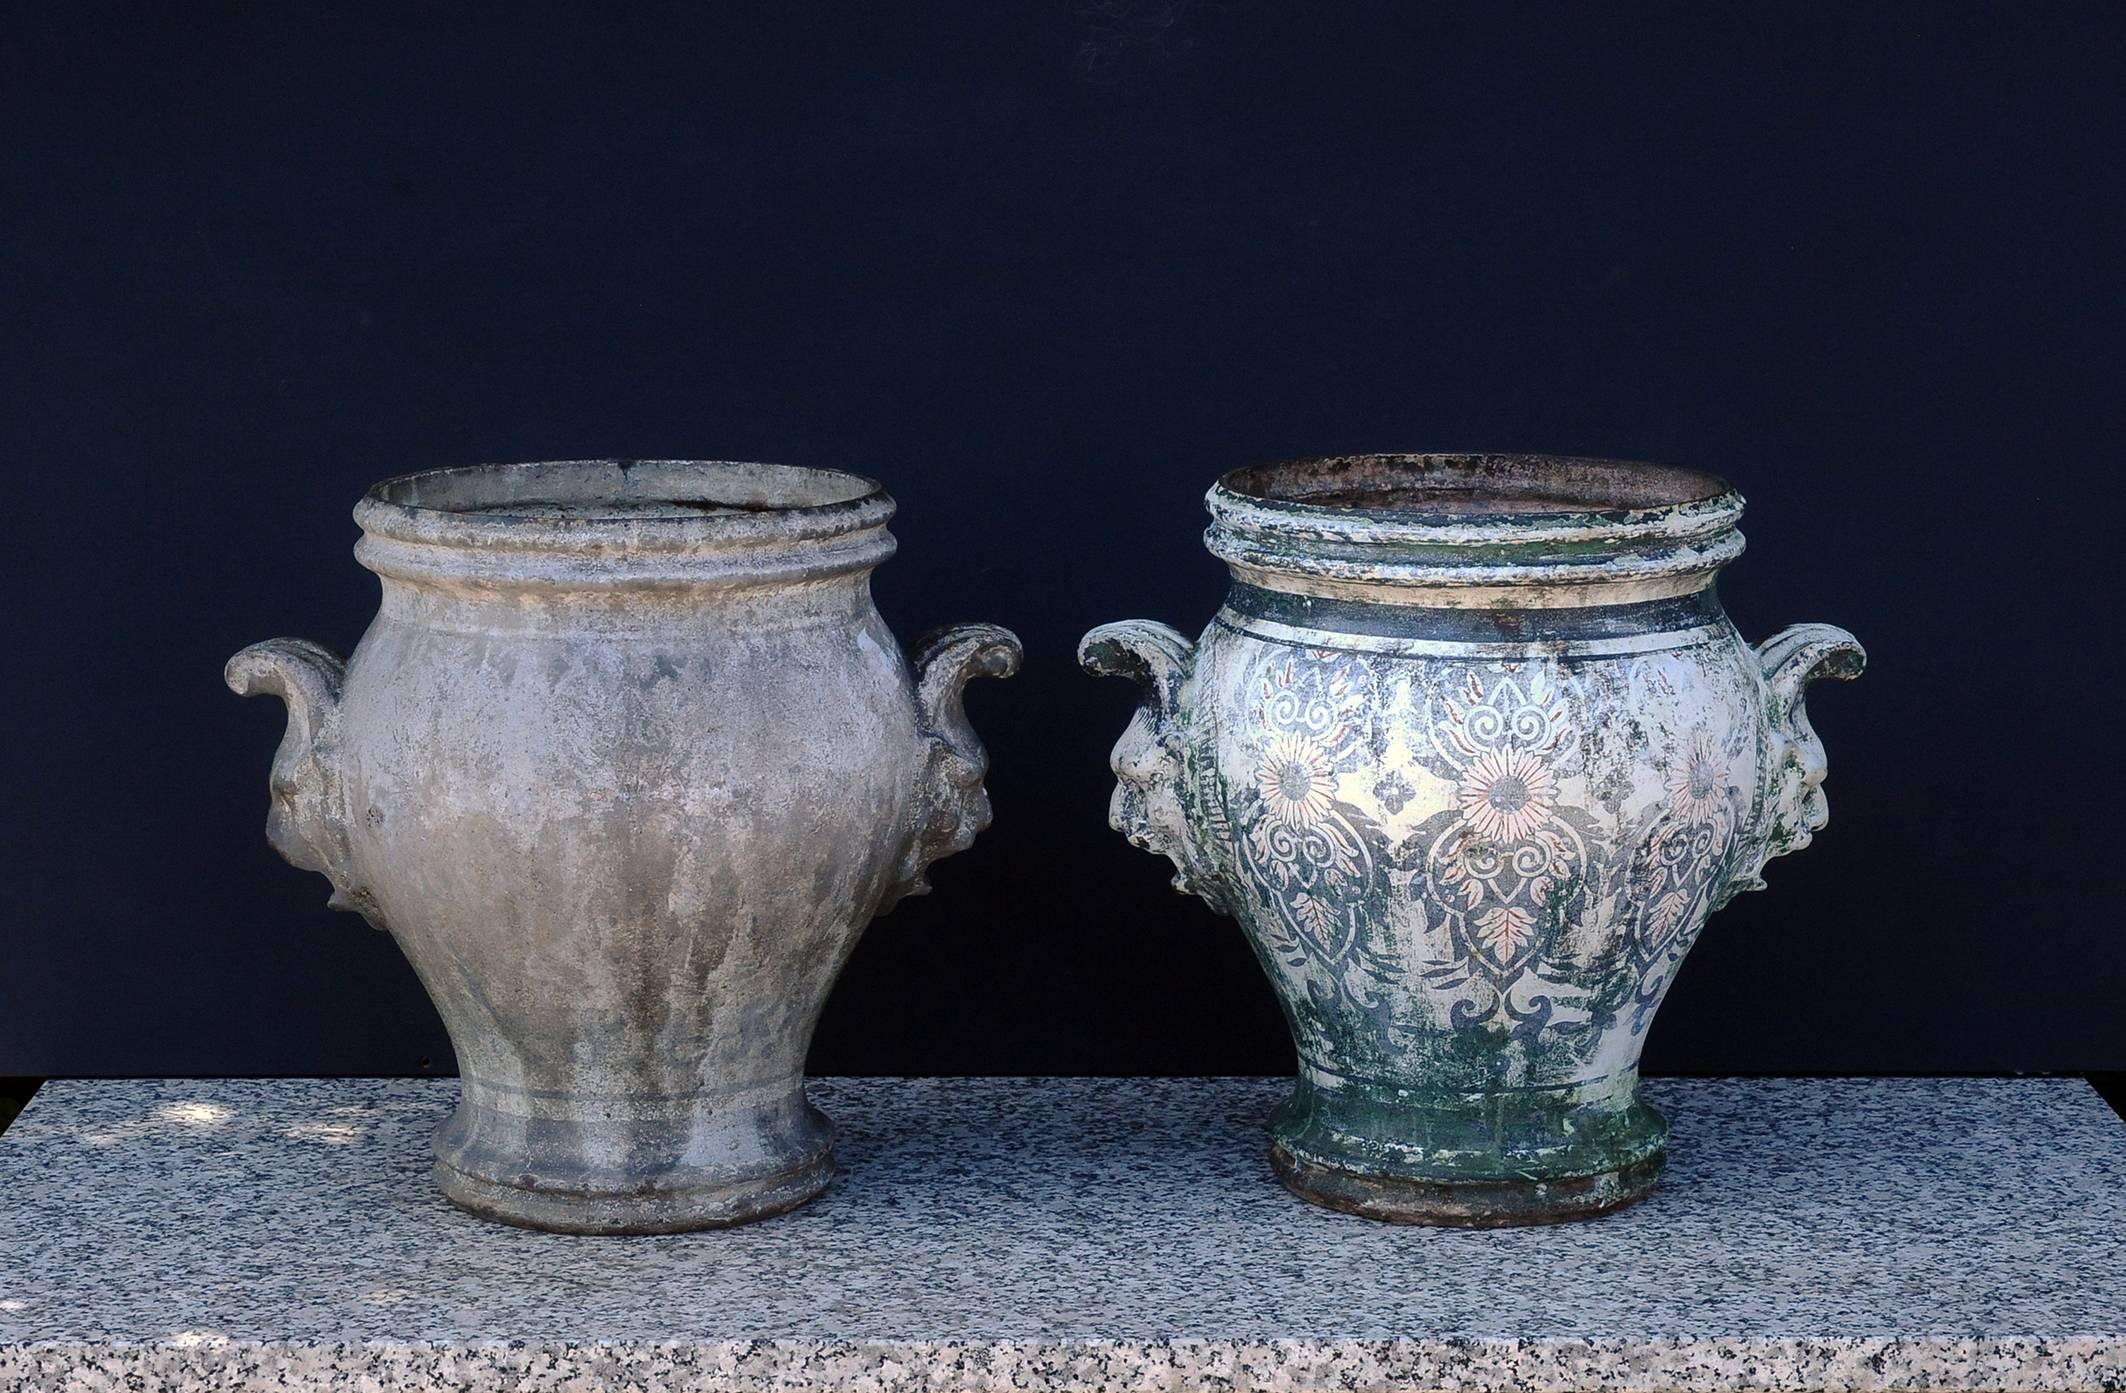 Pair of planters.
Cast iron enameled,
circa 1850.
From the town Rouen in the north of France (Normandy).
One restoration on the bottom of one the planter who still have a clean enameled.
One of the planters has taken the wear of the weather as